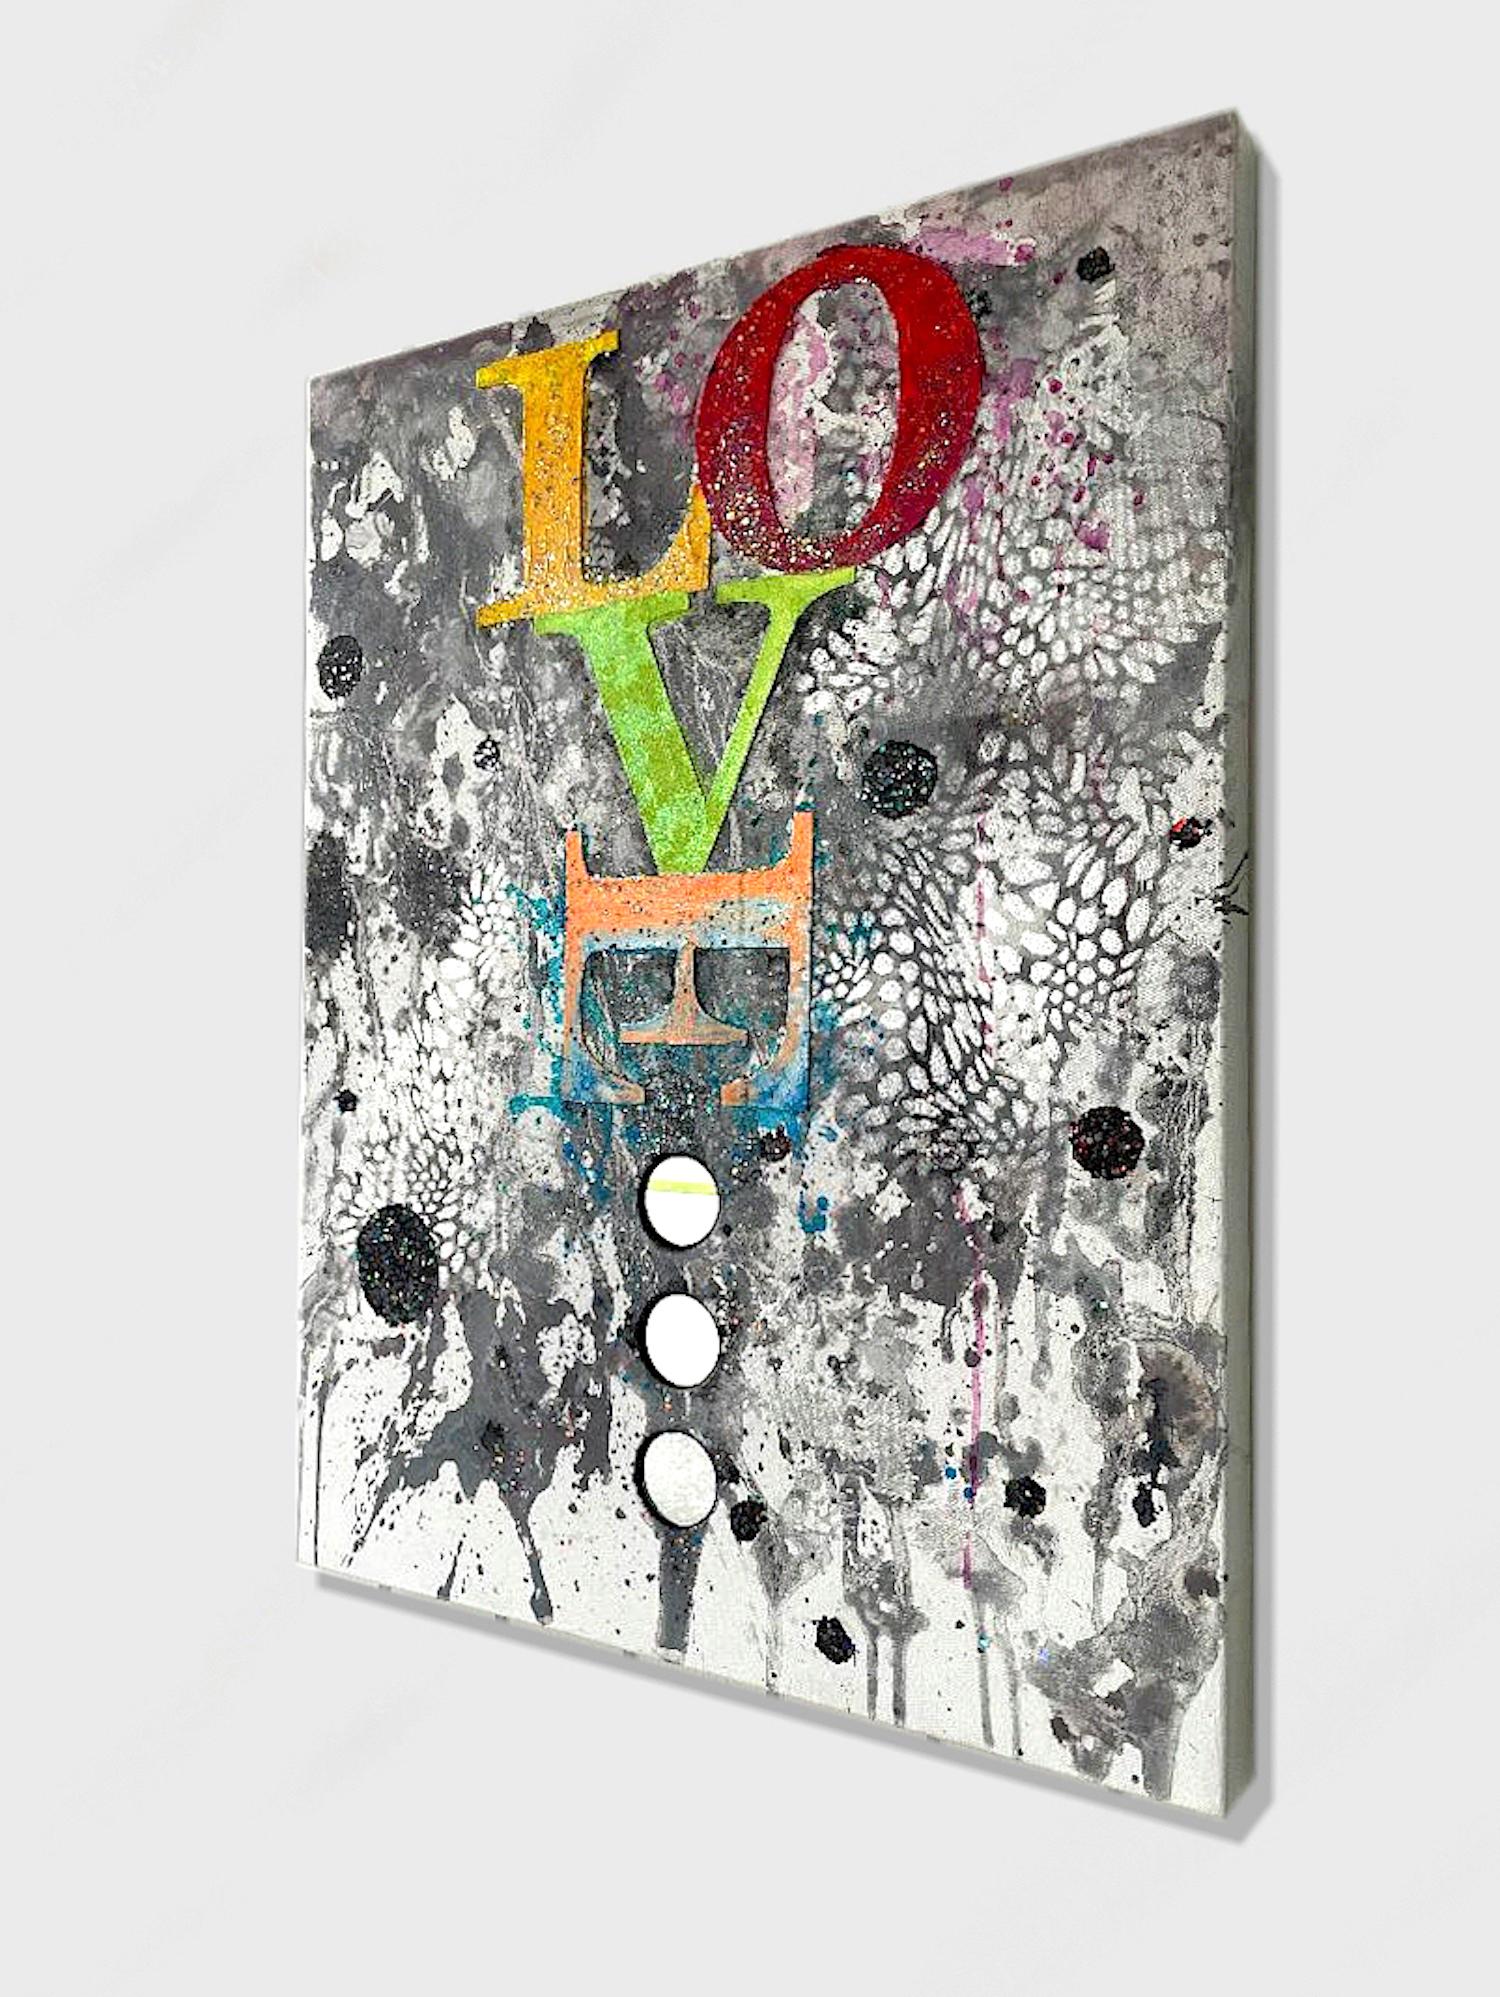 Artist: Kaloust Guedel
Work: Original Painting, Handmade Artwork, One of a Kind 
Medium: Acrylic on Canvas over Board, Mirror, Polyester, Spray Paint.
Year: 2023
Style: Contemporary Art, 
Title: Love-4
Size: 32